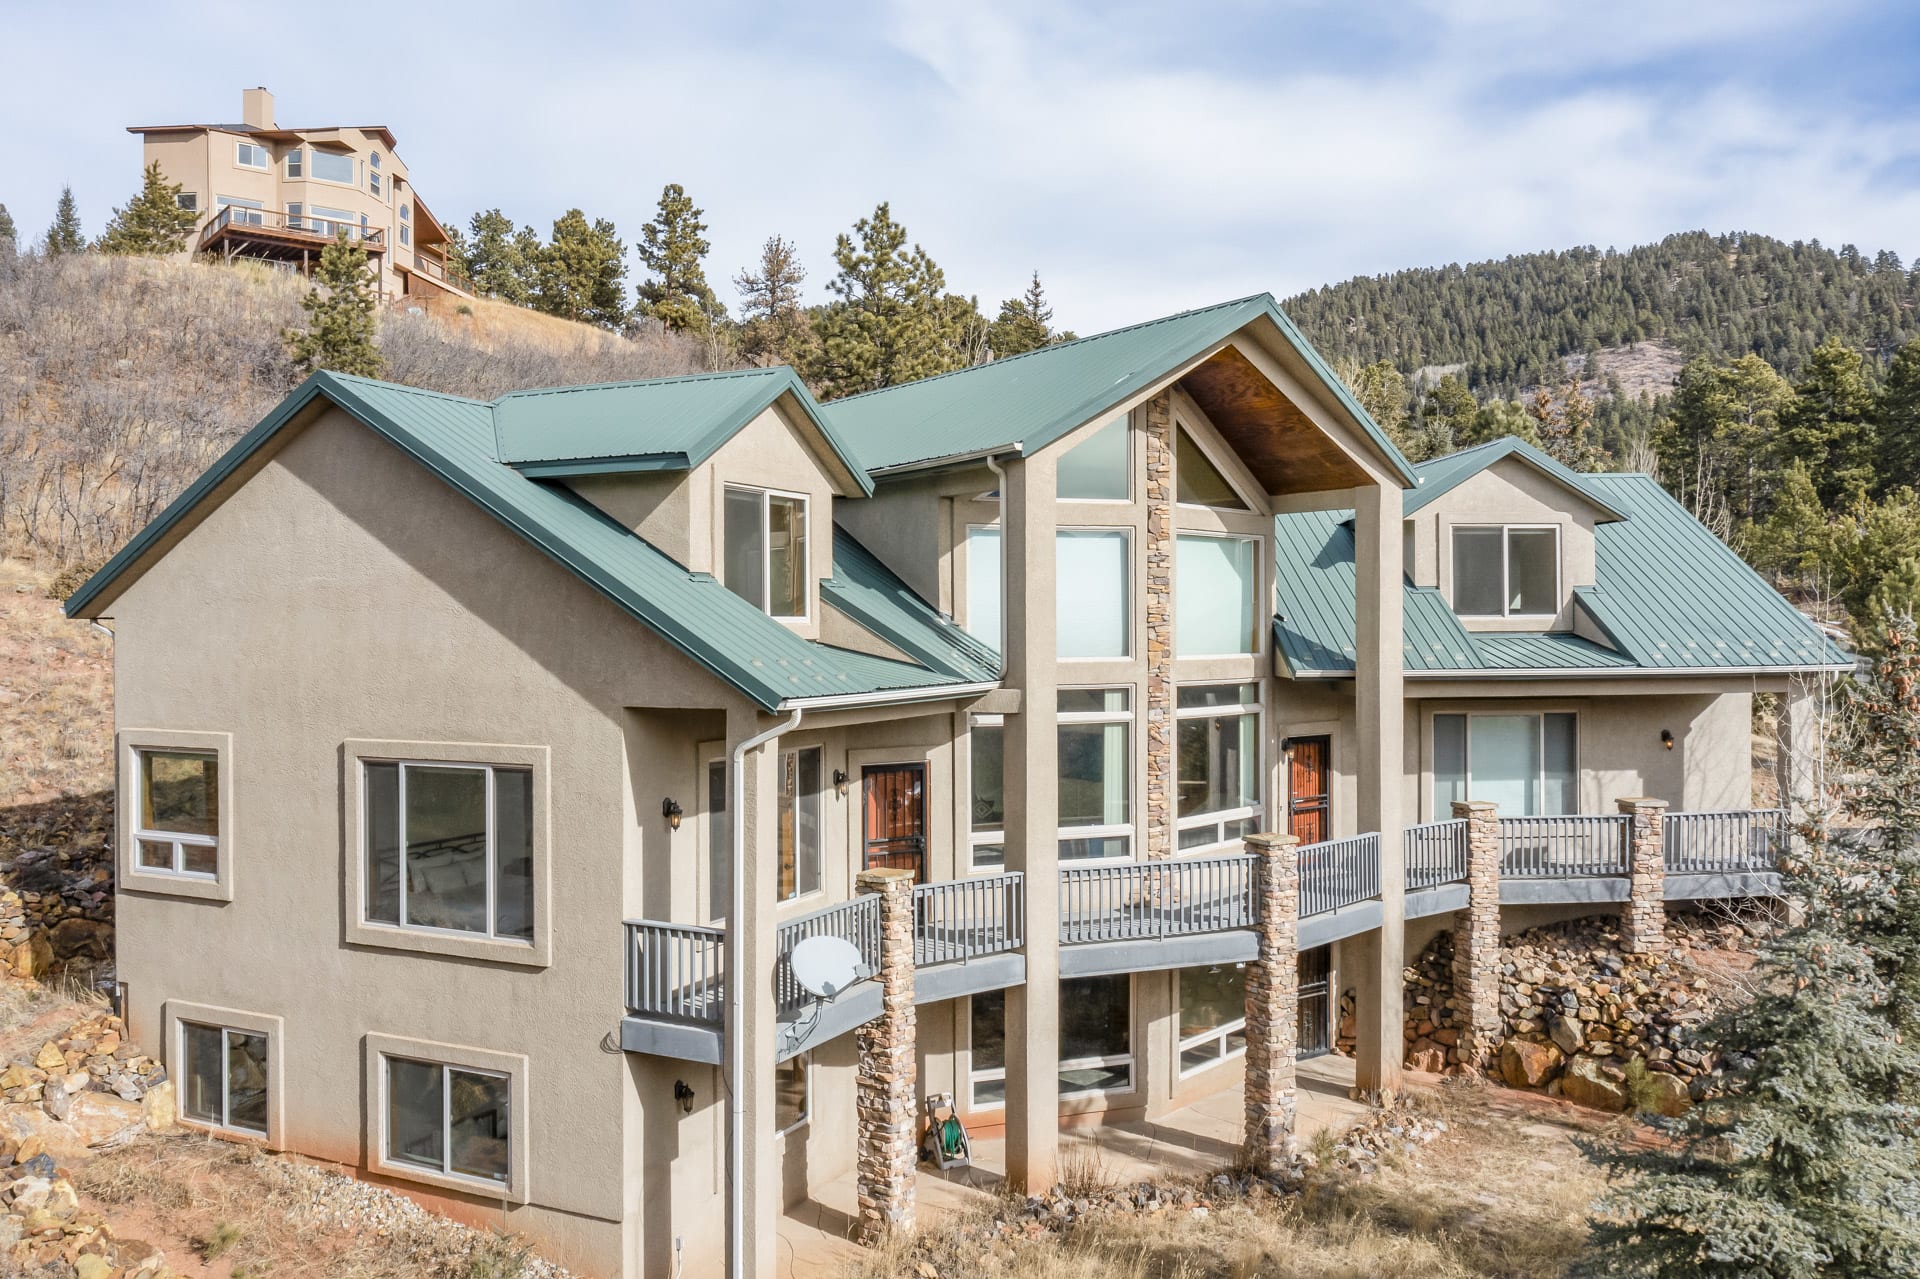 Book vacation homes near Pikes Peak in Woodland Park